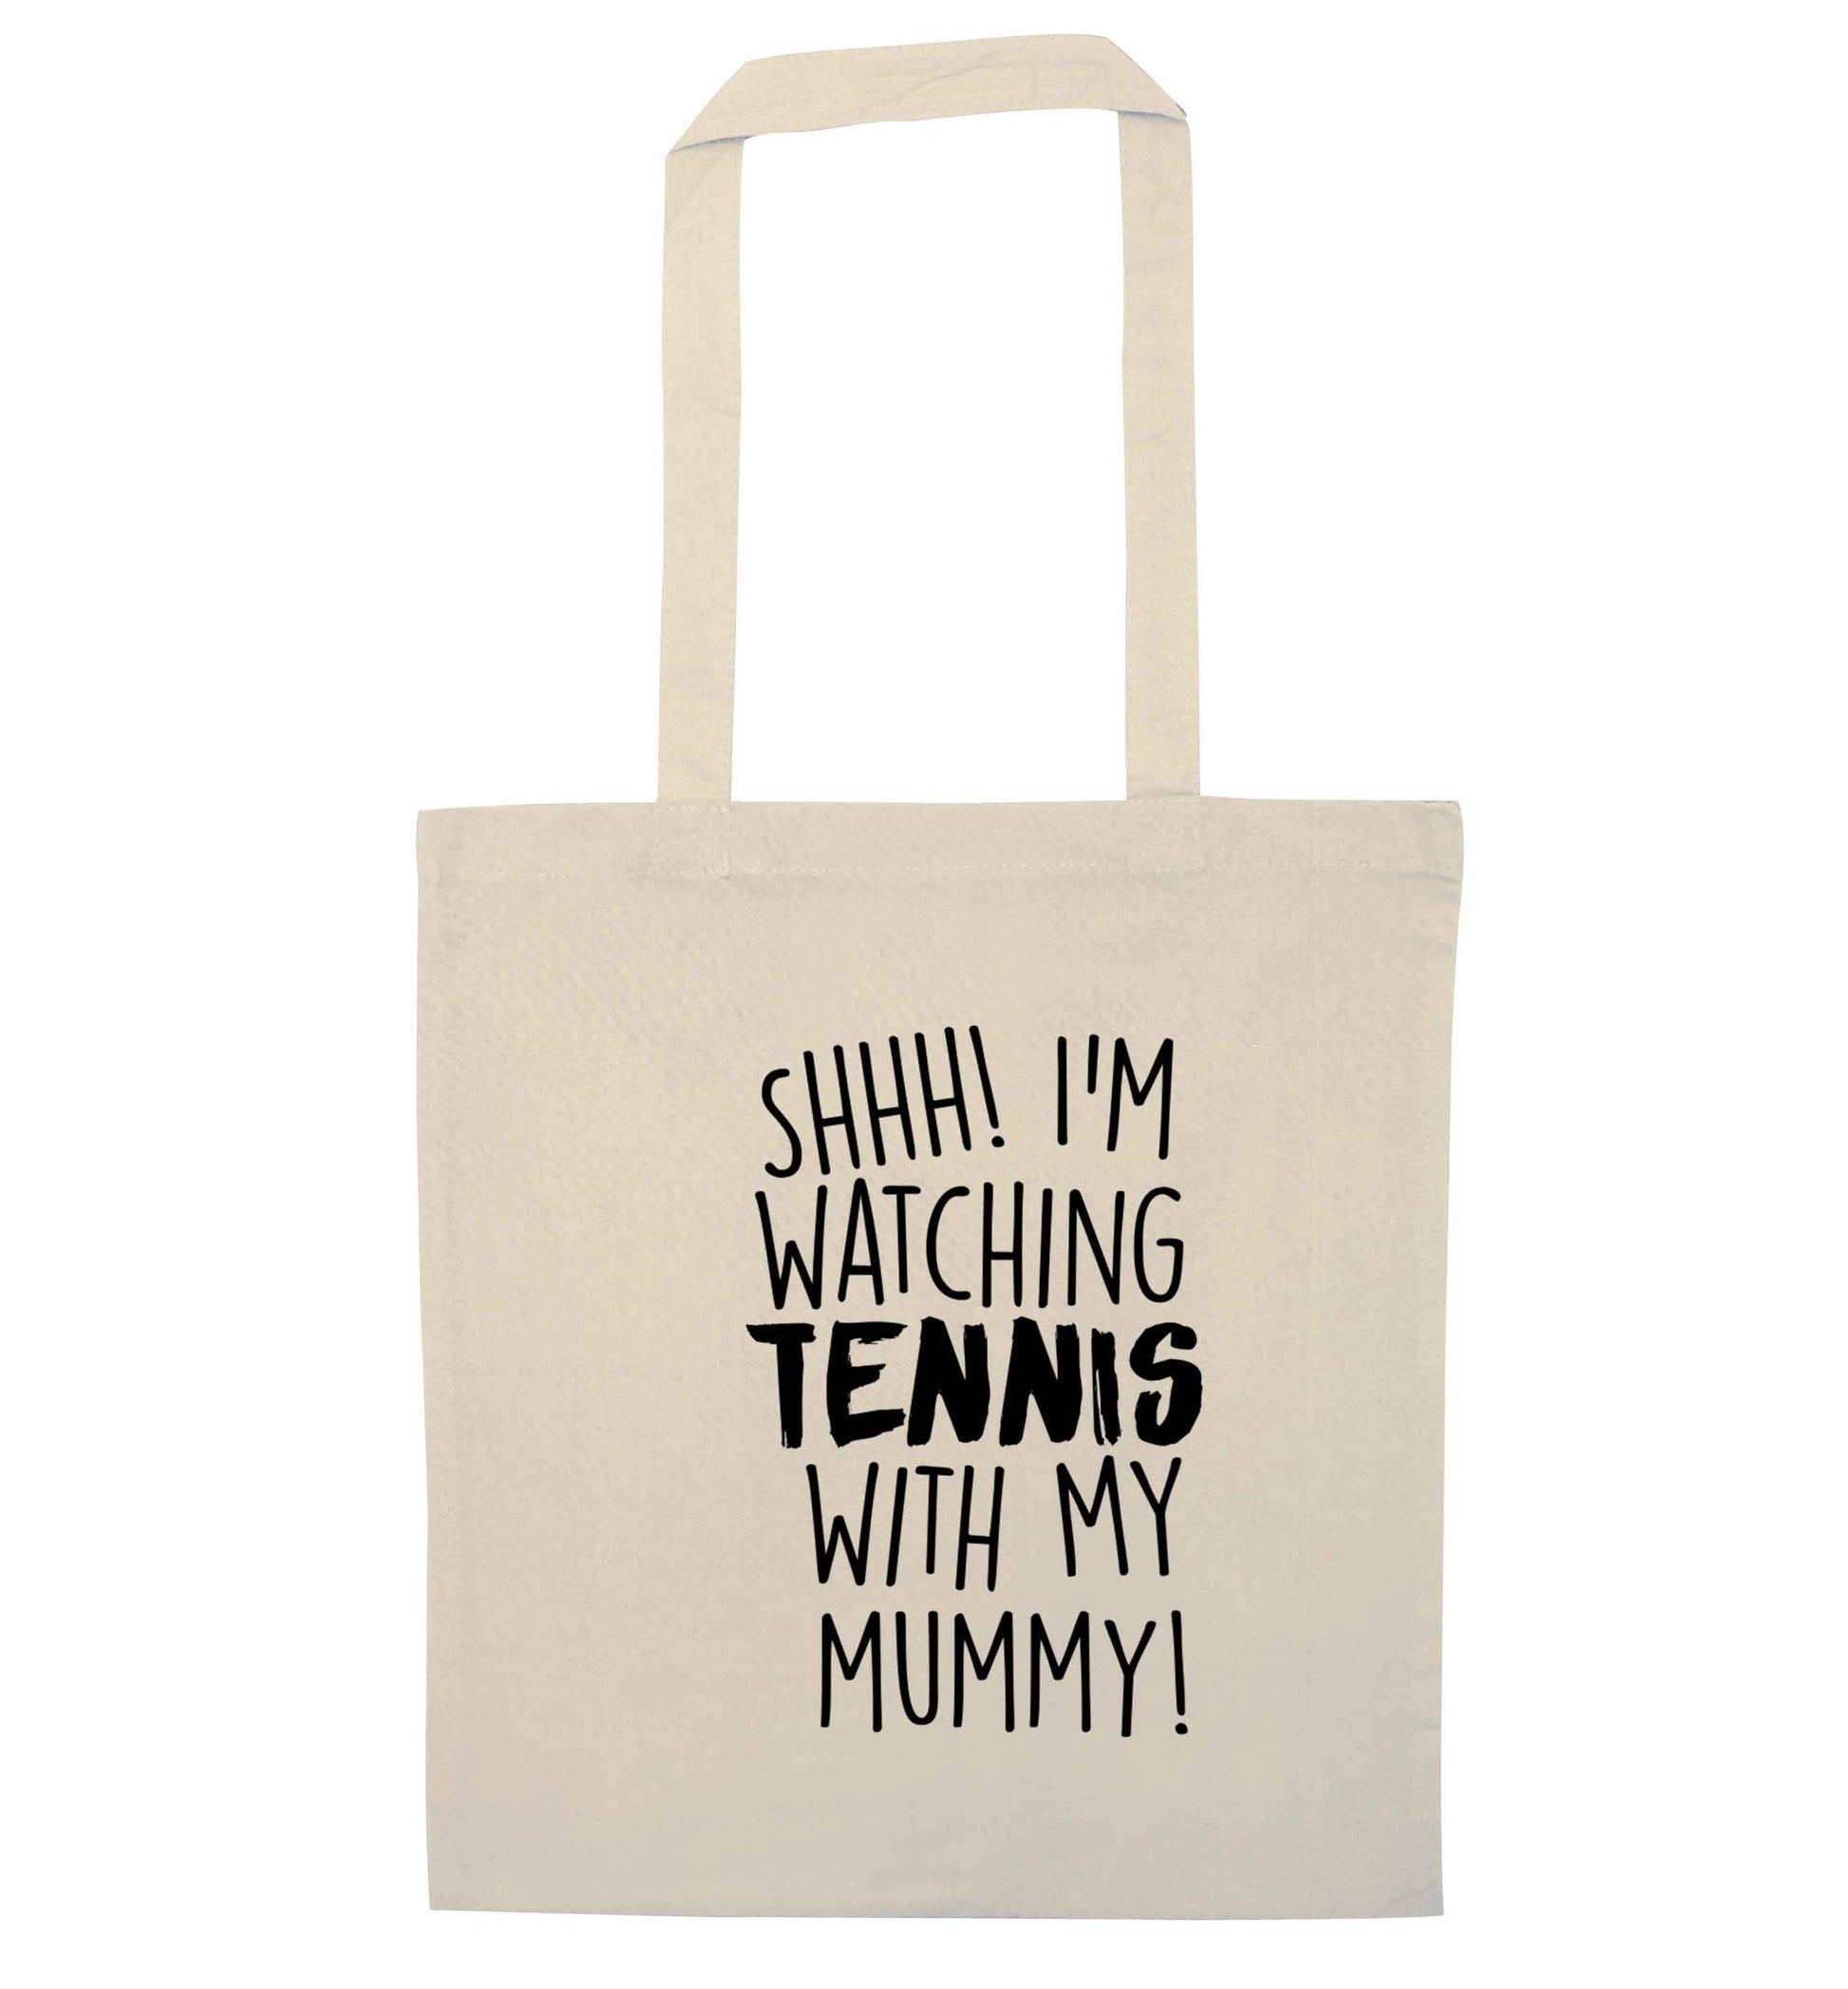 Shh! I'm watching tennis with my mummy! natural tote bag